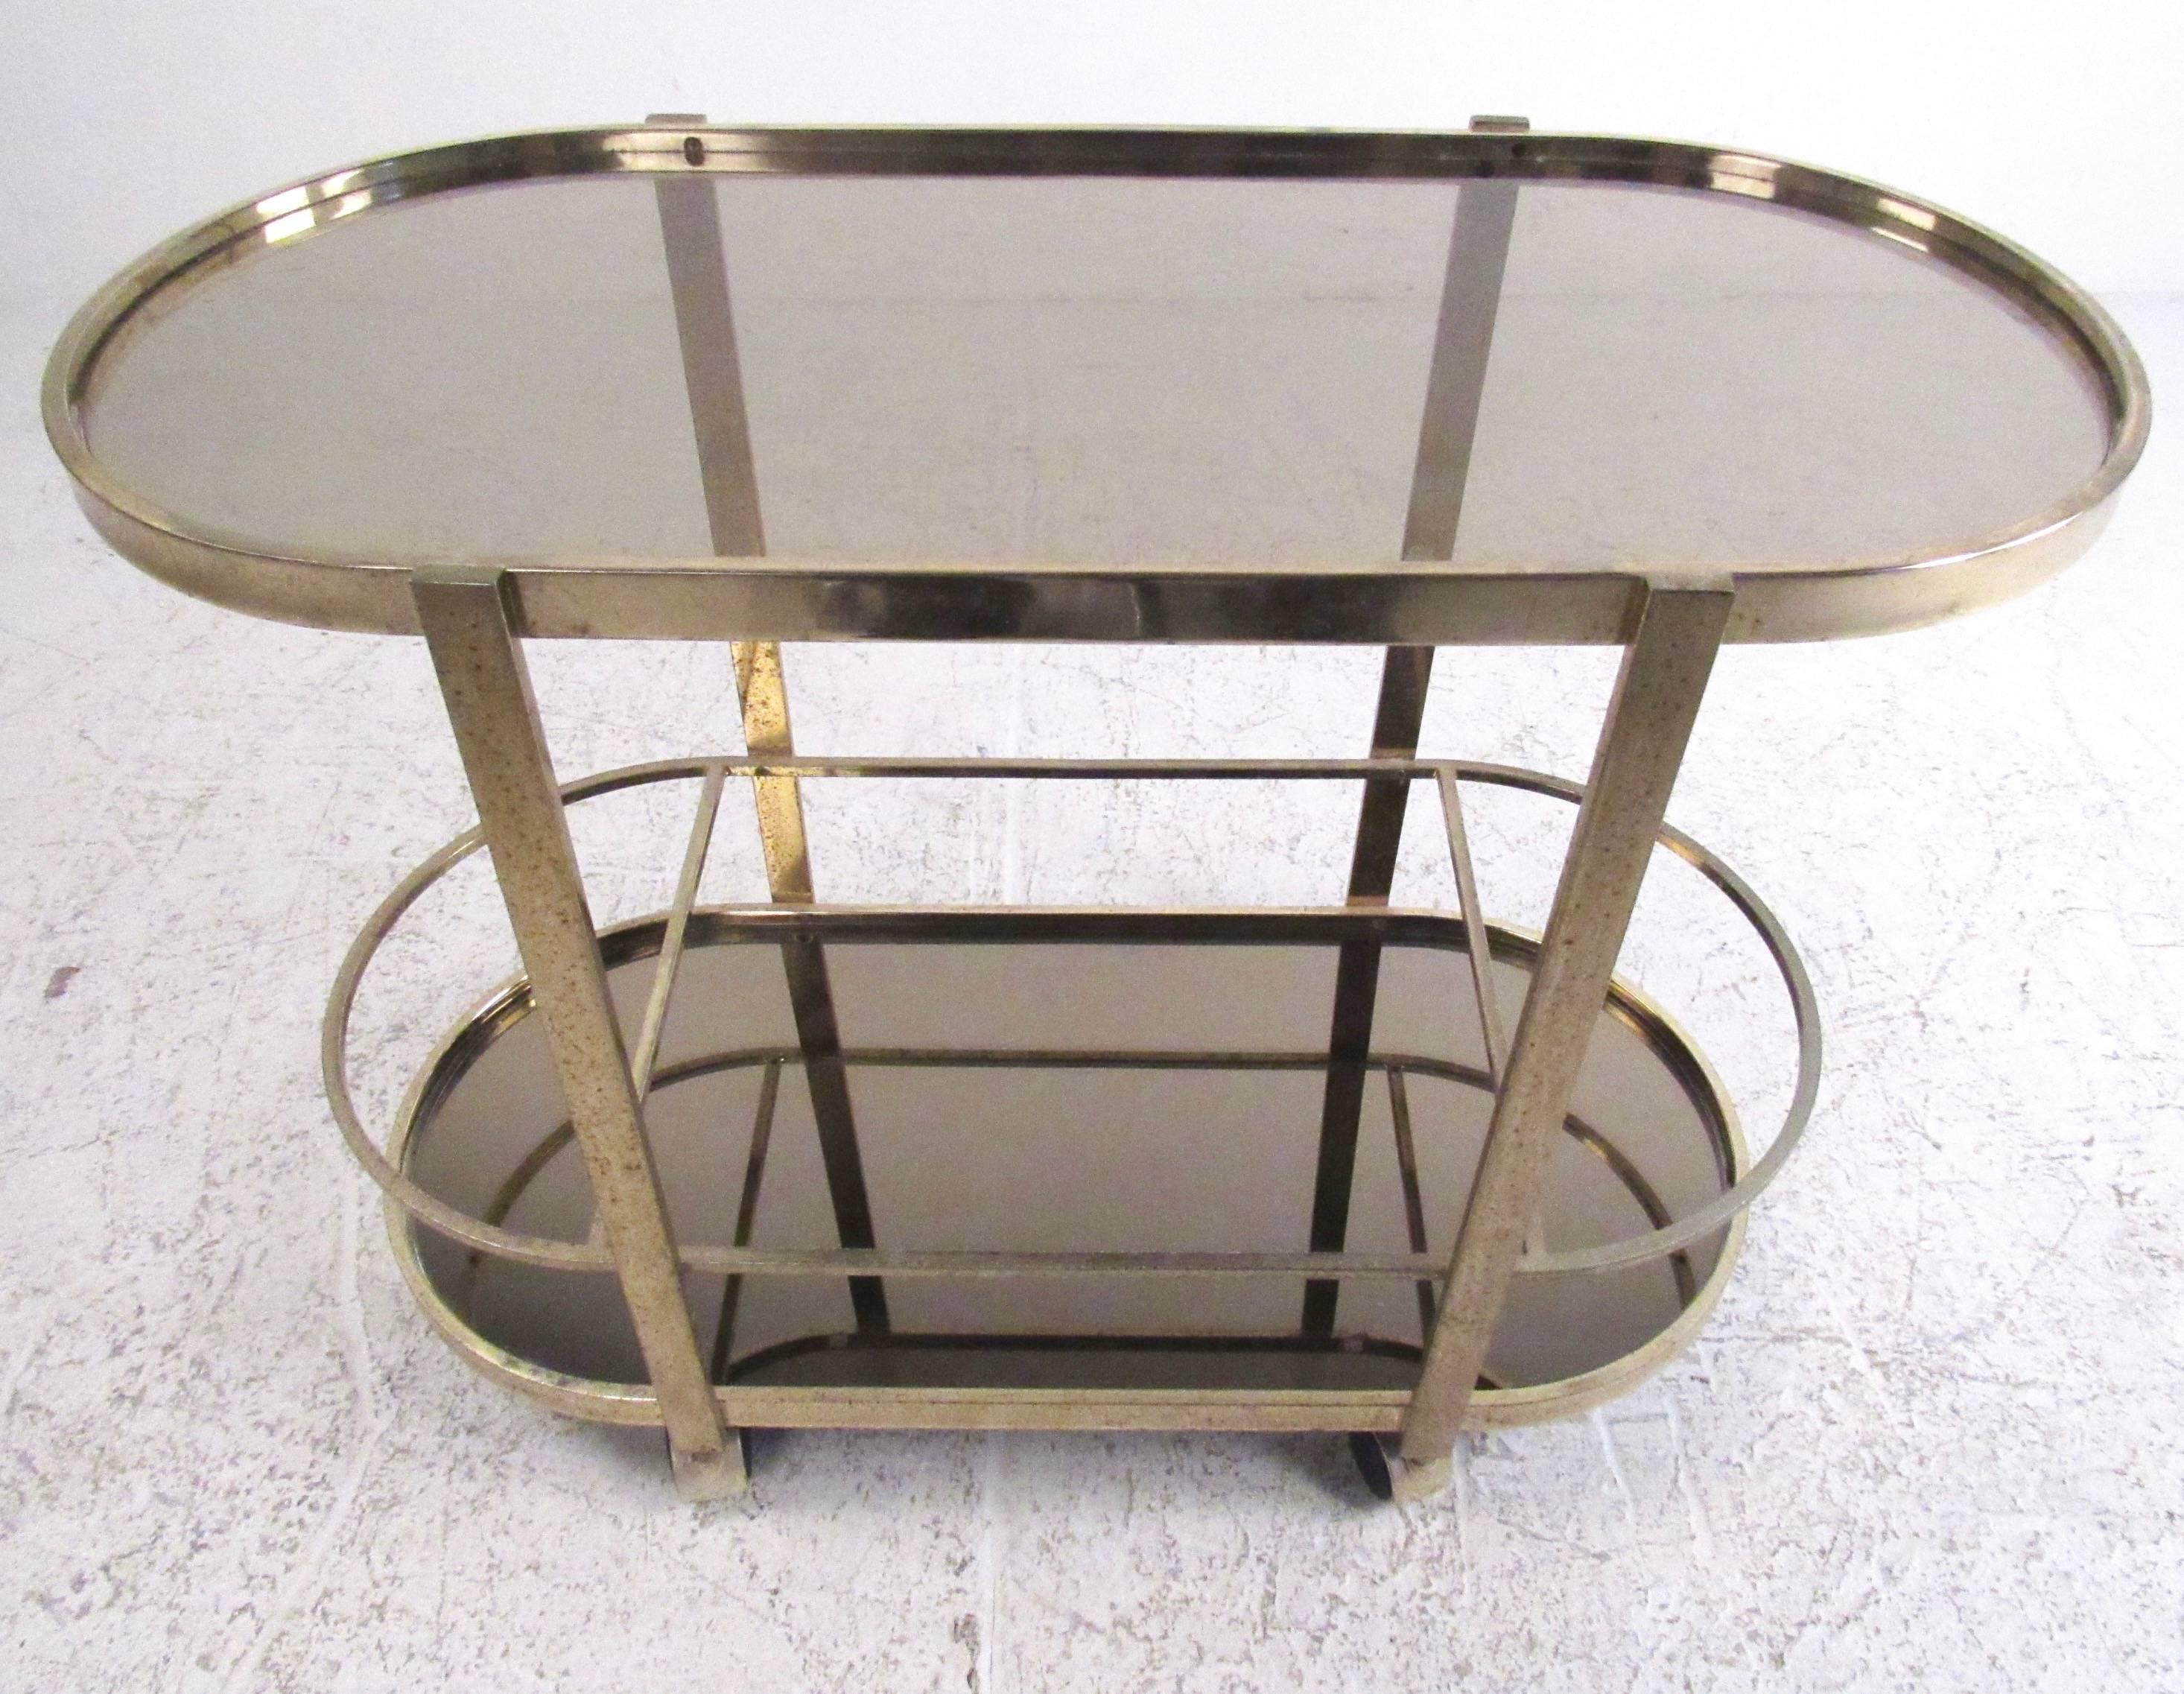 This stylish modern bar cart features oxidized brass finish with two tier oval shelves for storage and display. Mirrored glass bottom and Mid-Century style make this a versatile and attractive cart for bar service or storage. 
Please confirm item